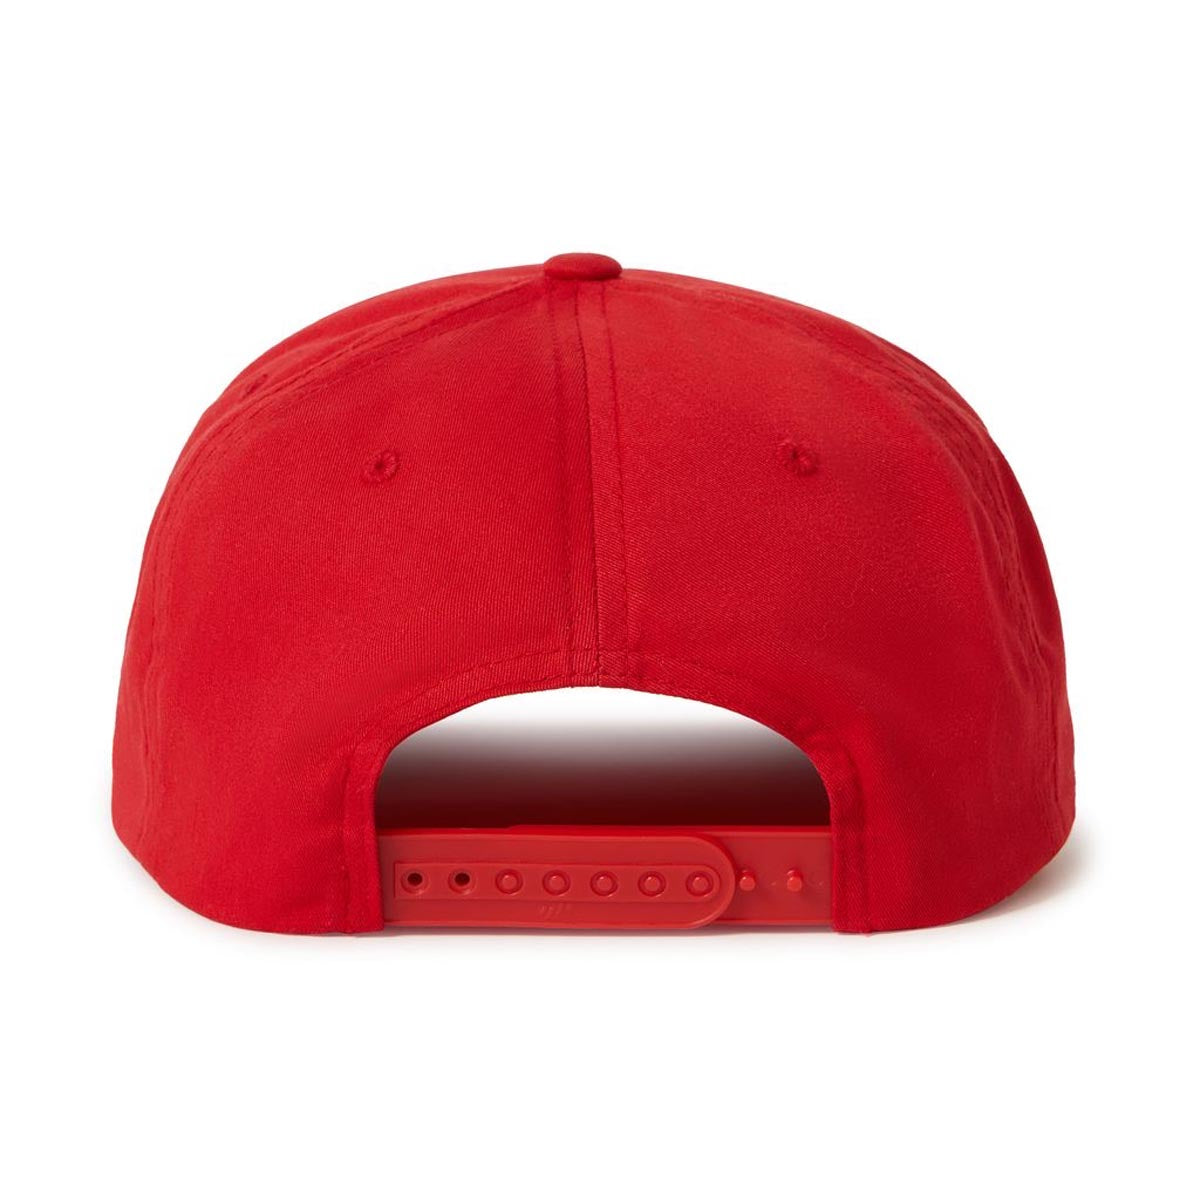 Brixton x Coors Banquet Hops Snapback Hat - Red image 2